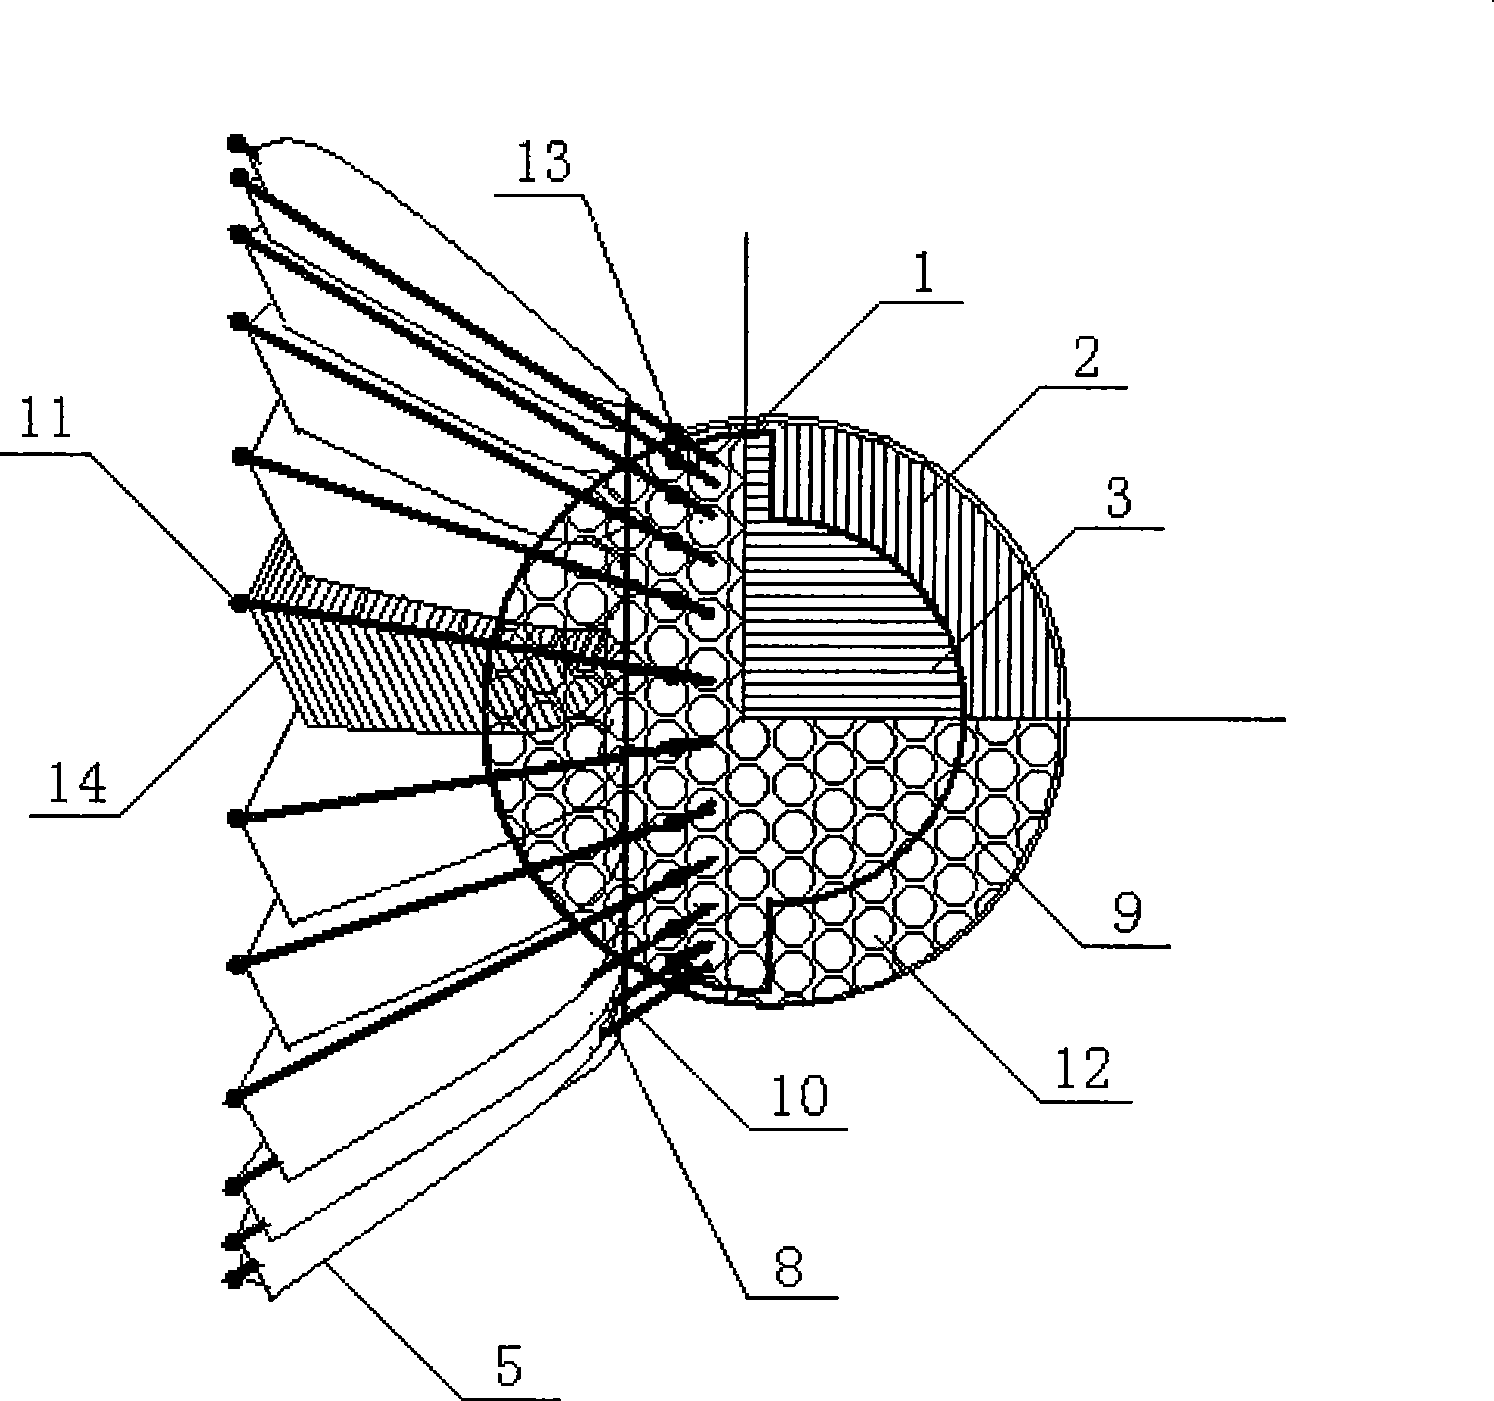 Method capable of reducing golf flight speed and golf structure